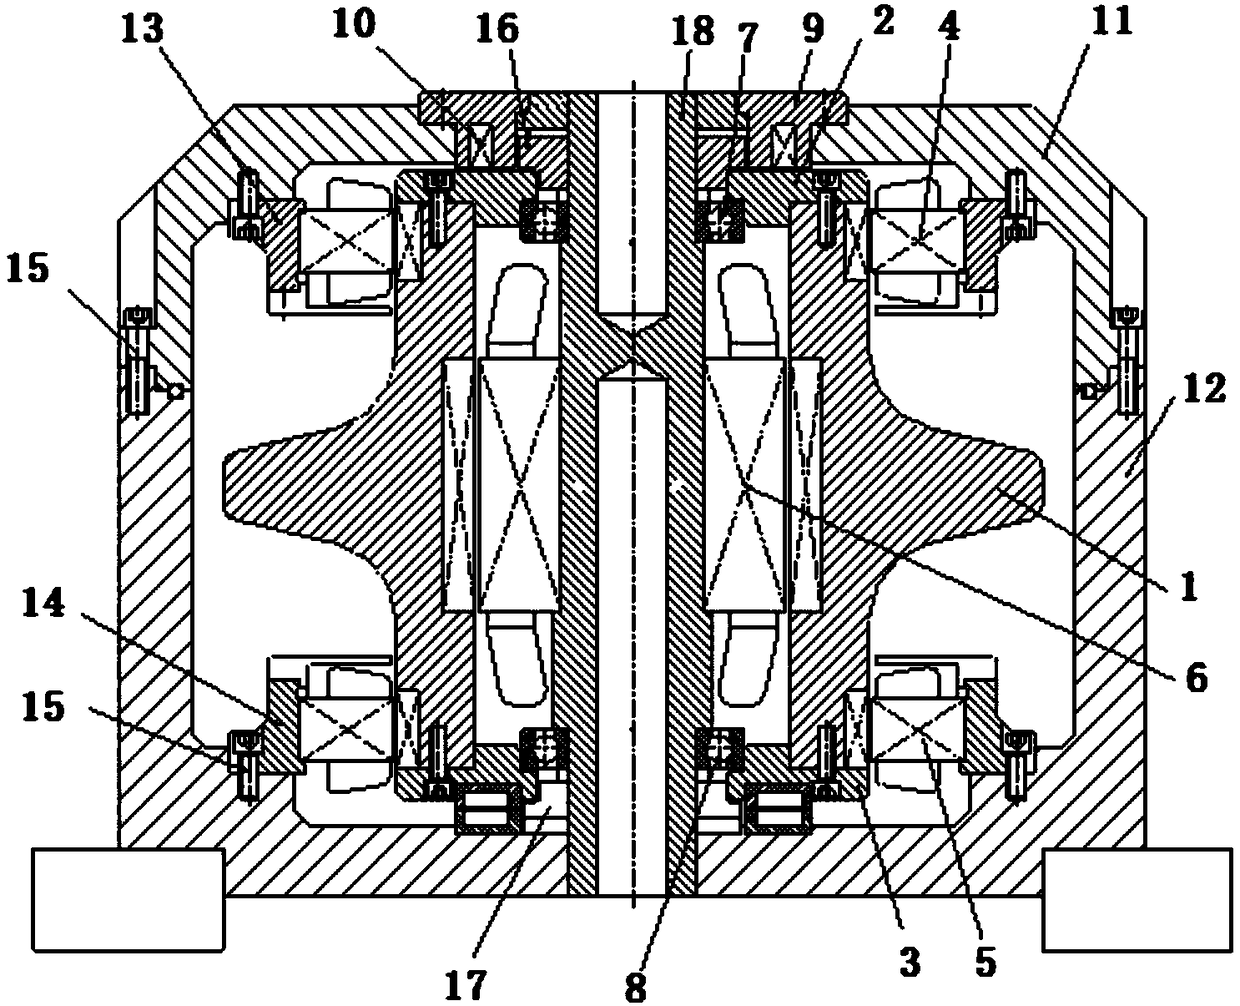 Curved variable cross-section rotor flywheel energy storage system supported by permanent magnet bearing and magnetic bearing